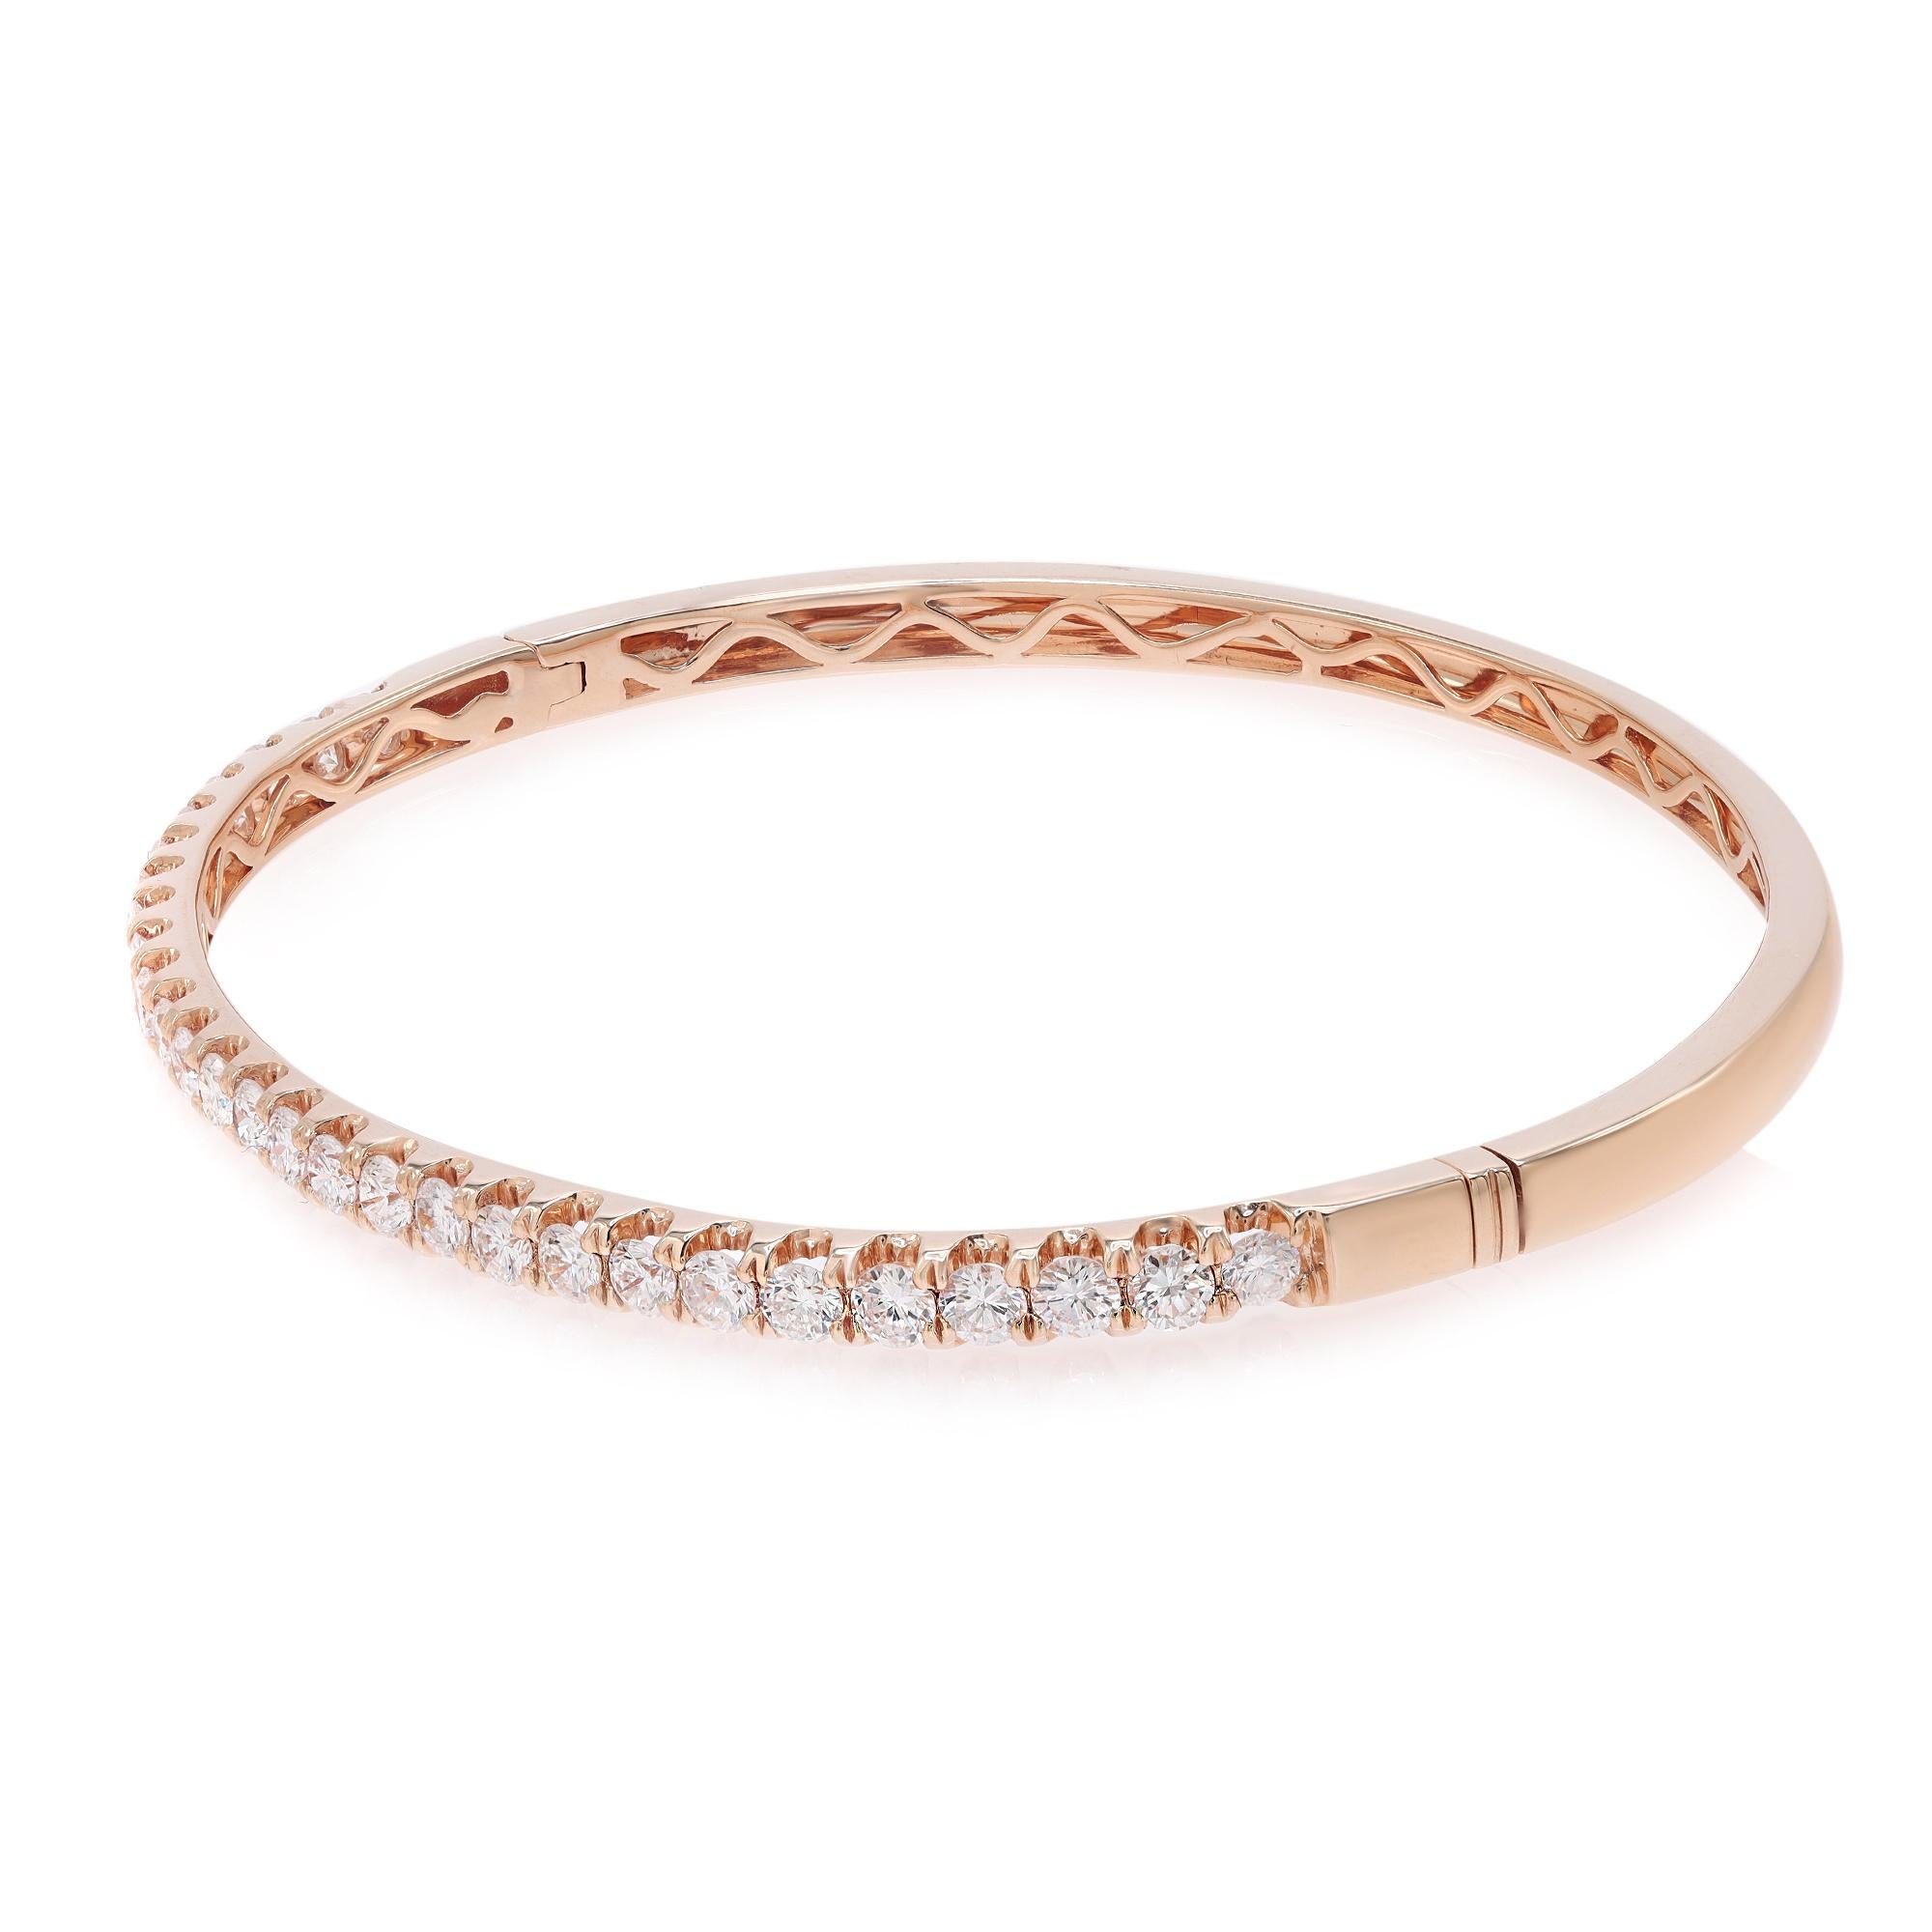 This beautifully crafted bangle bracelet features round brilliant cut diamonds encrusted halfway through the bangle in four prong setting. Crafted in 18k rose gold. Total diamond weight: 2.00 carats. Diamond Quality: F-G color and SI clarity. Wrist